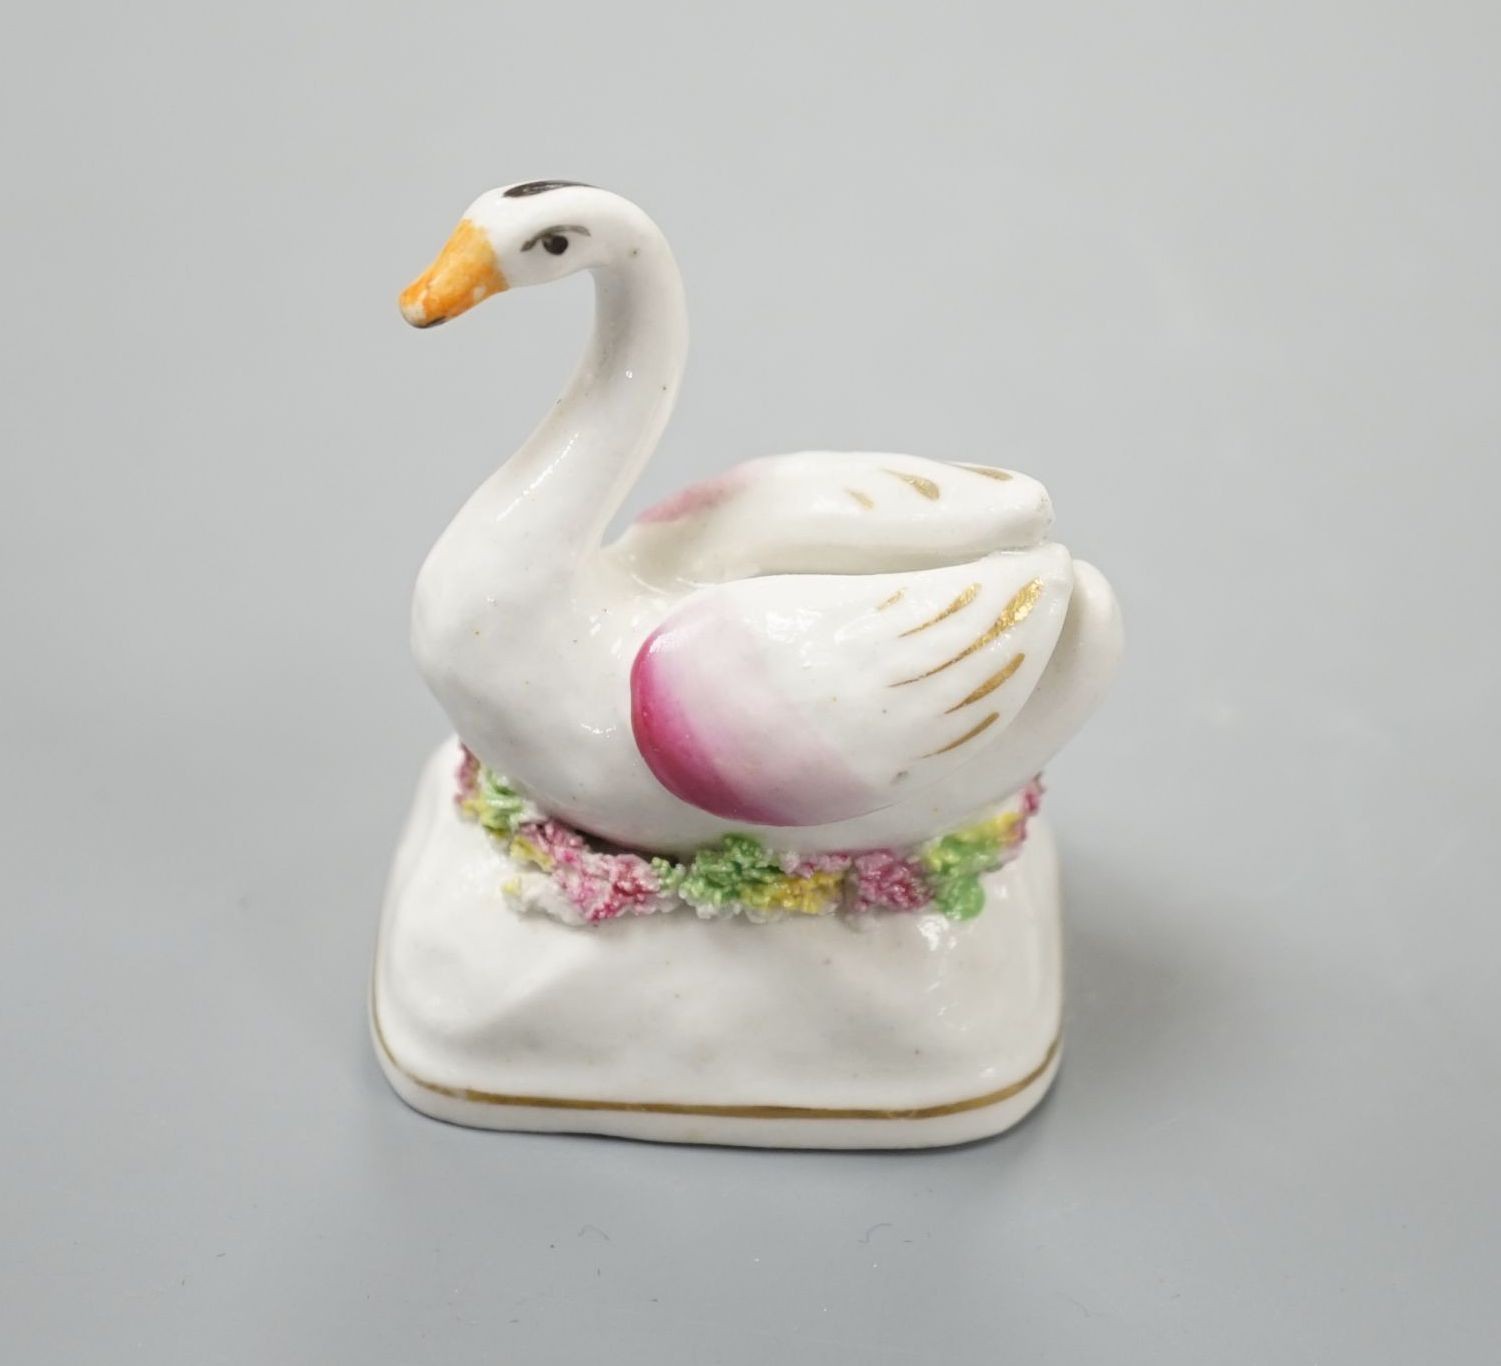 A Staffordshire porcelain model of a swan, c.1835-50, on a mound base, 5.4 cm high, Provenance: Dennis G.Rice collection